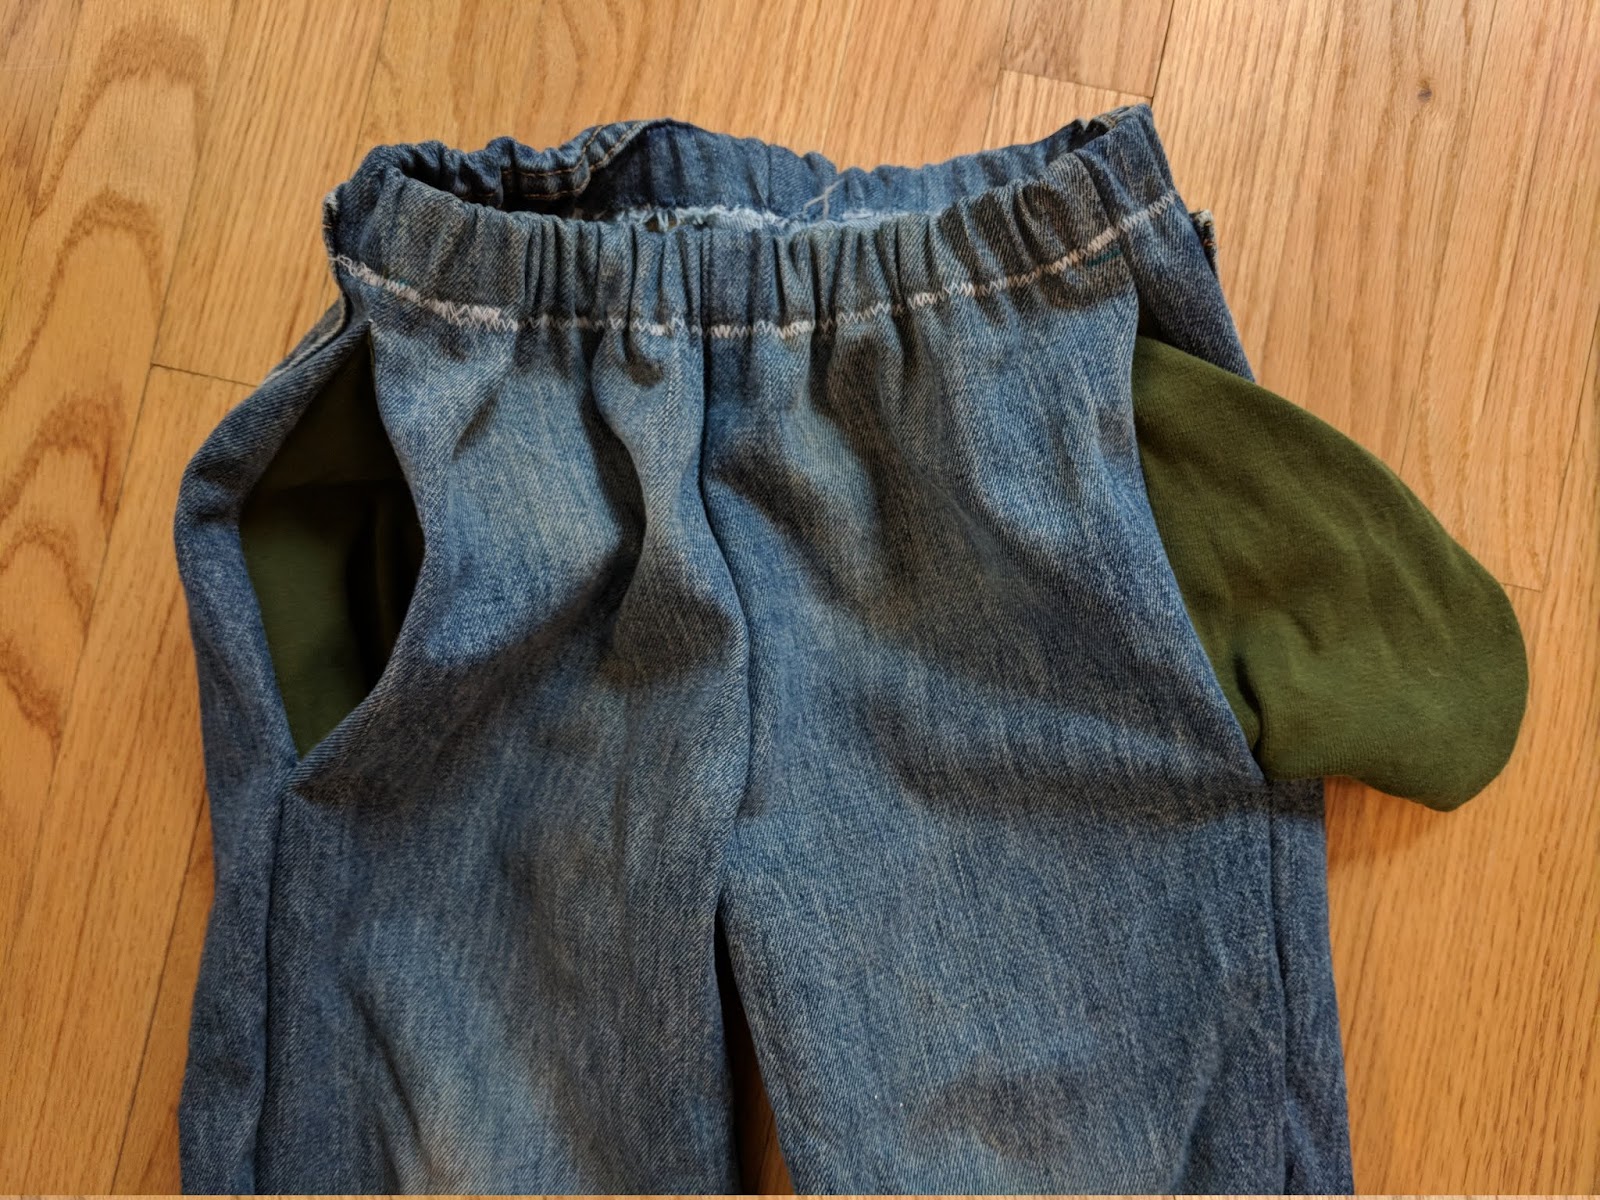 Dorybird Designs Blog: 2018-March: 2 pairs upcycled pants